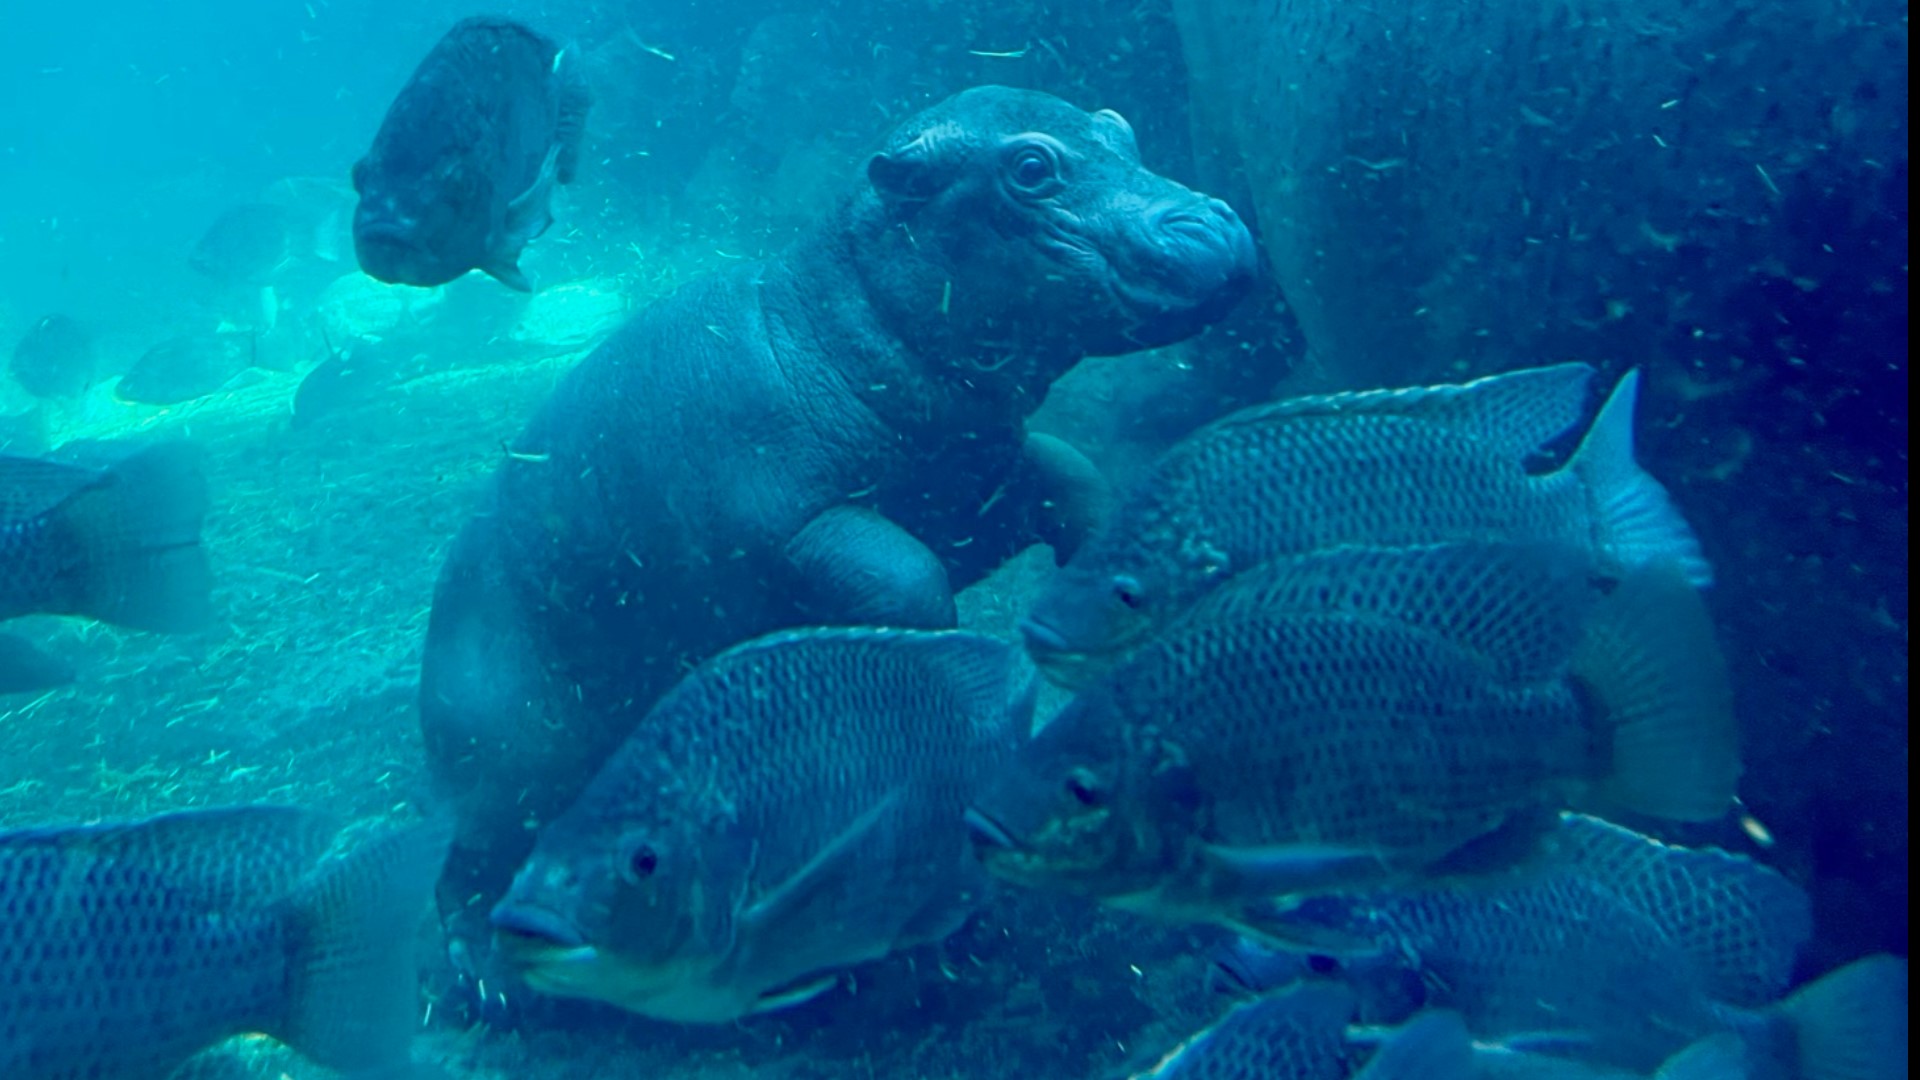 Two-week-old baby hippo Fritz and his mom Bibi explored the outdoor habitat at Cincinnati Zoo & Botanical Garden’s Hippo Cove for the first time.